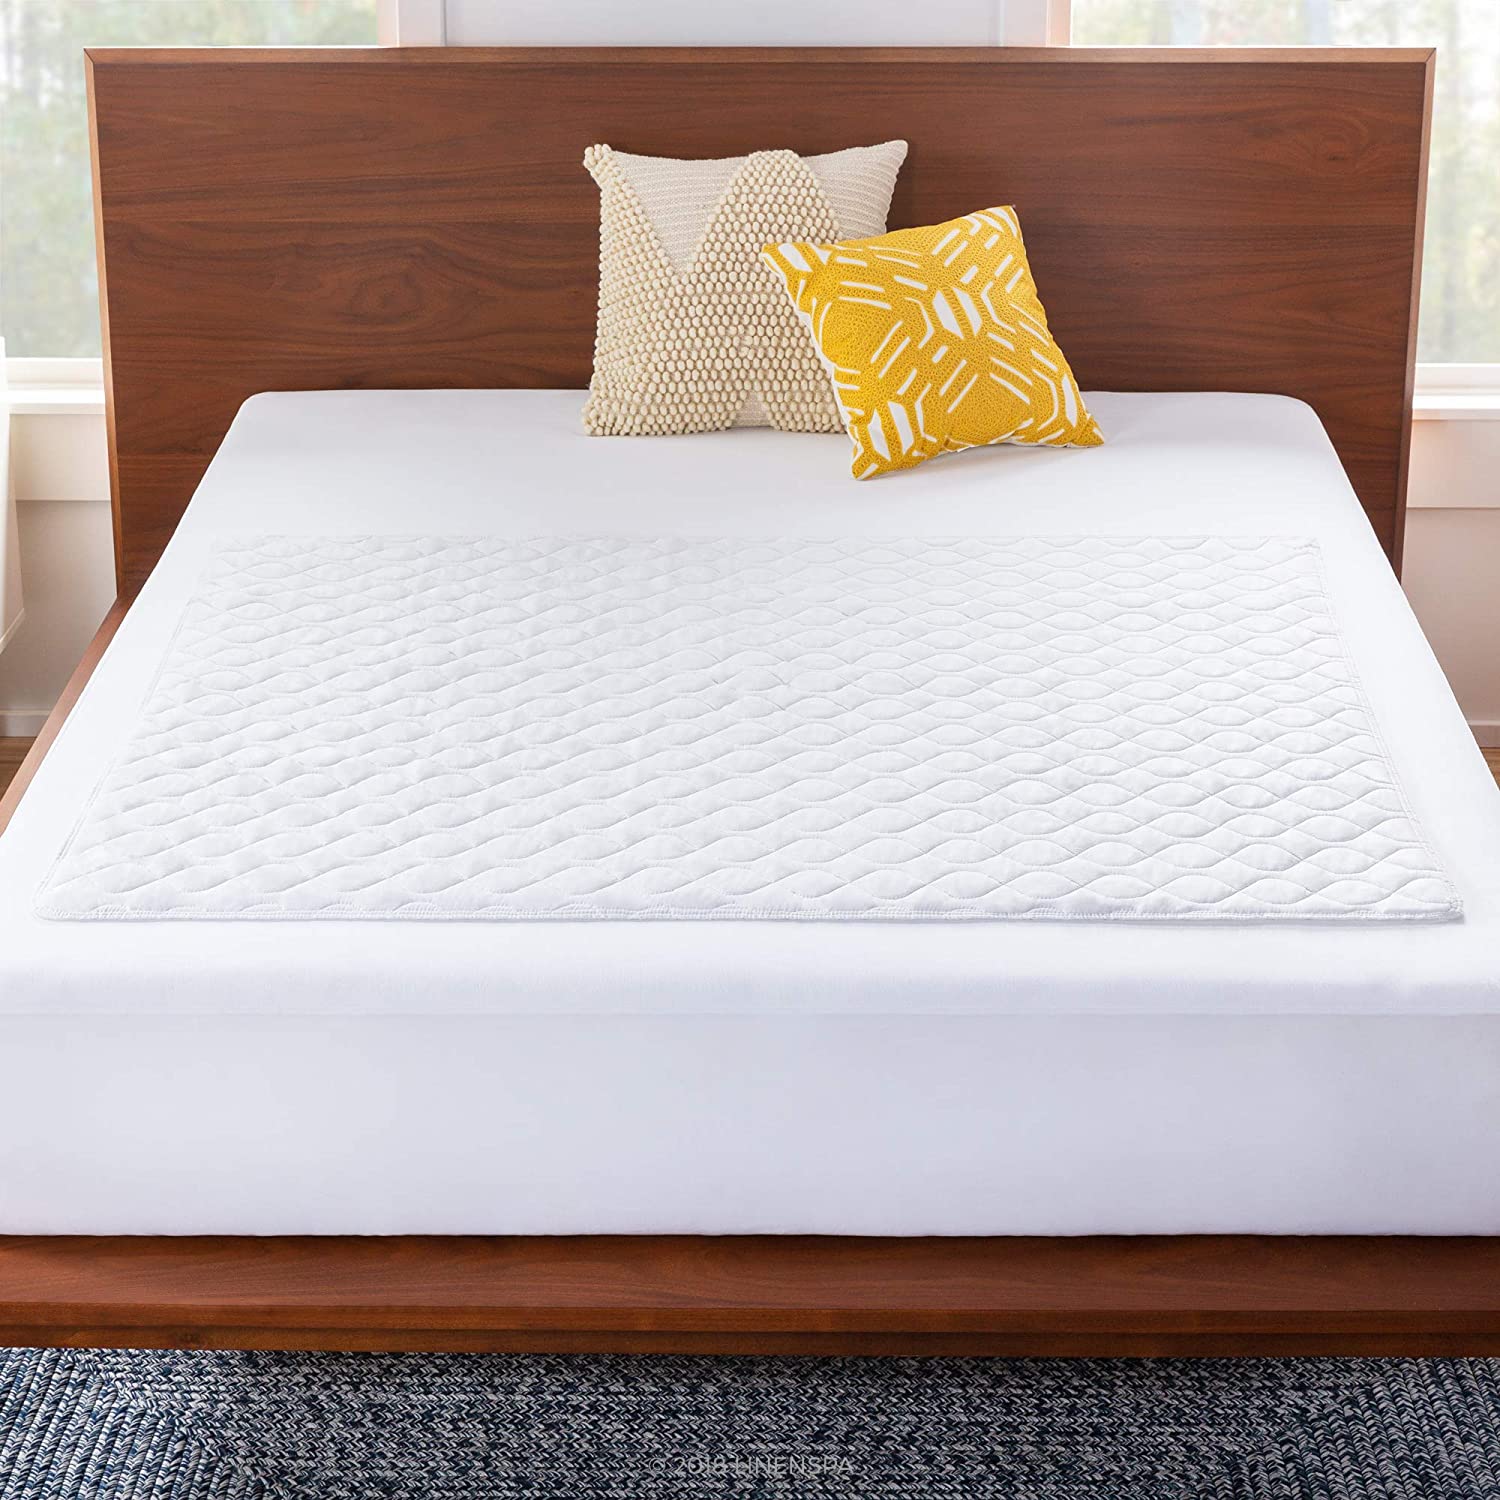 Do You Put A Bed Sheet Over A Mattress Protector